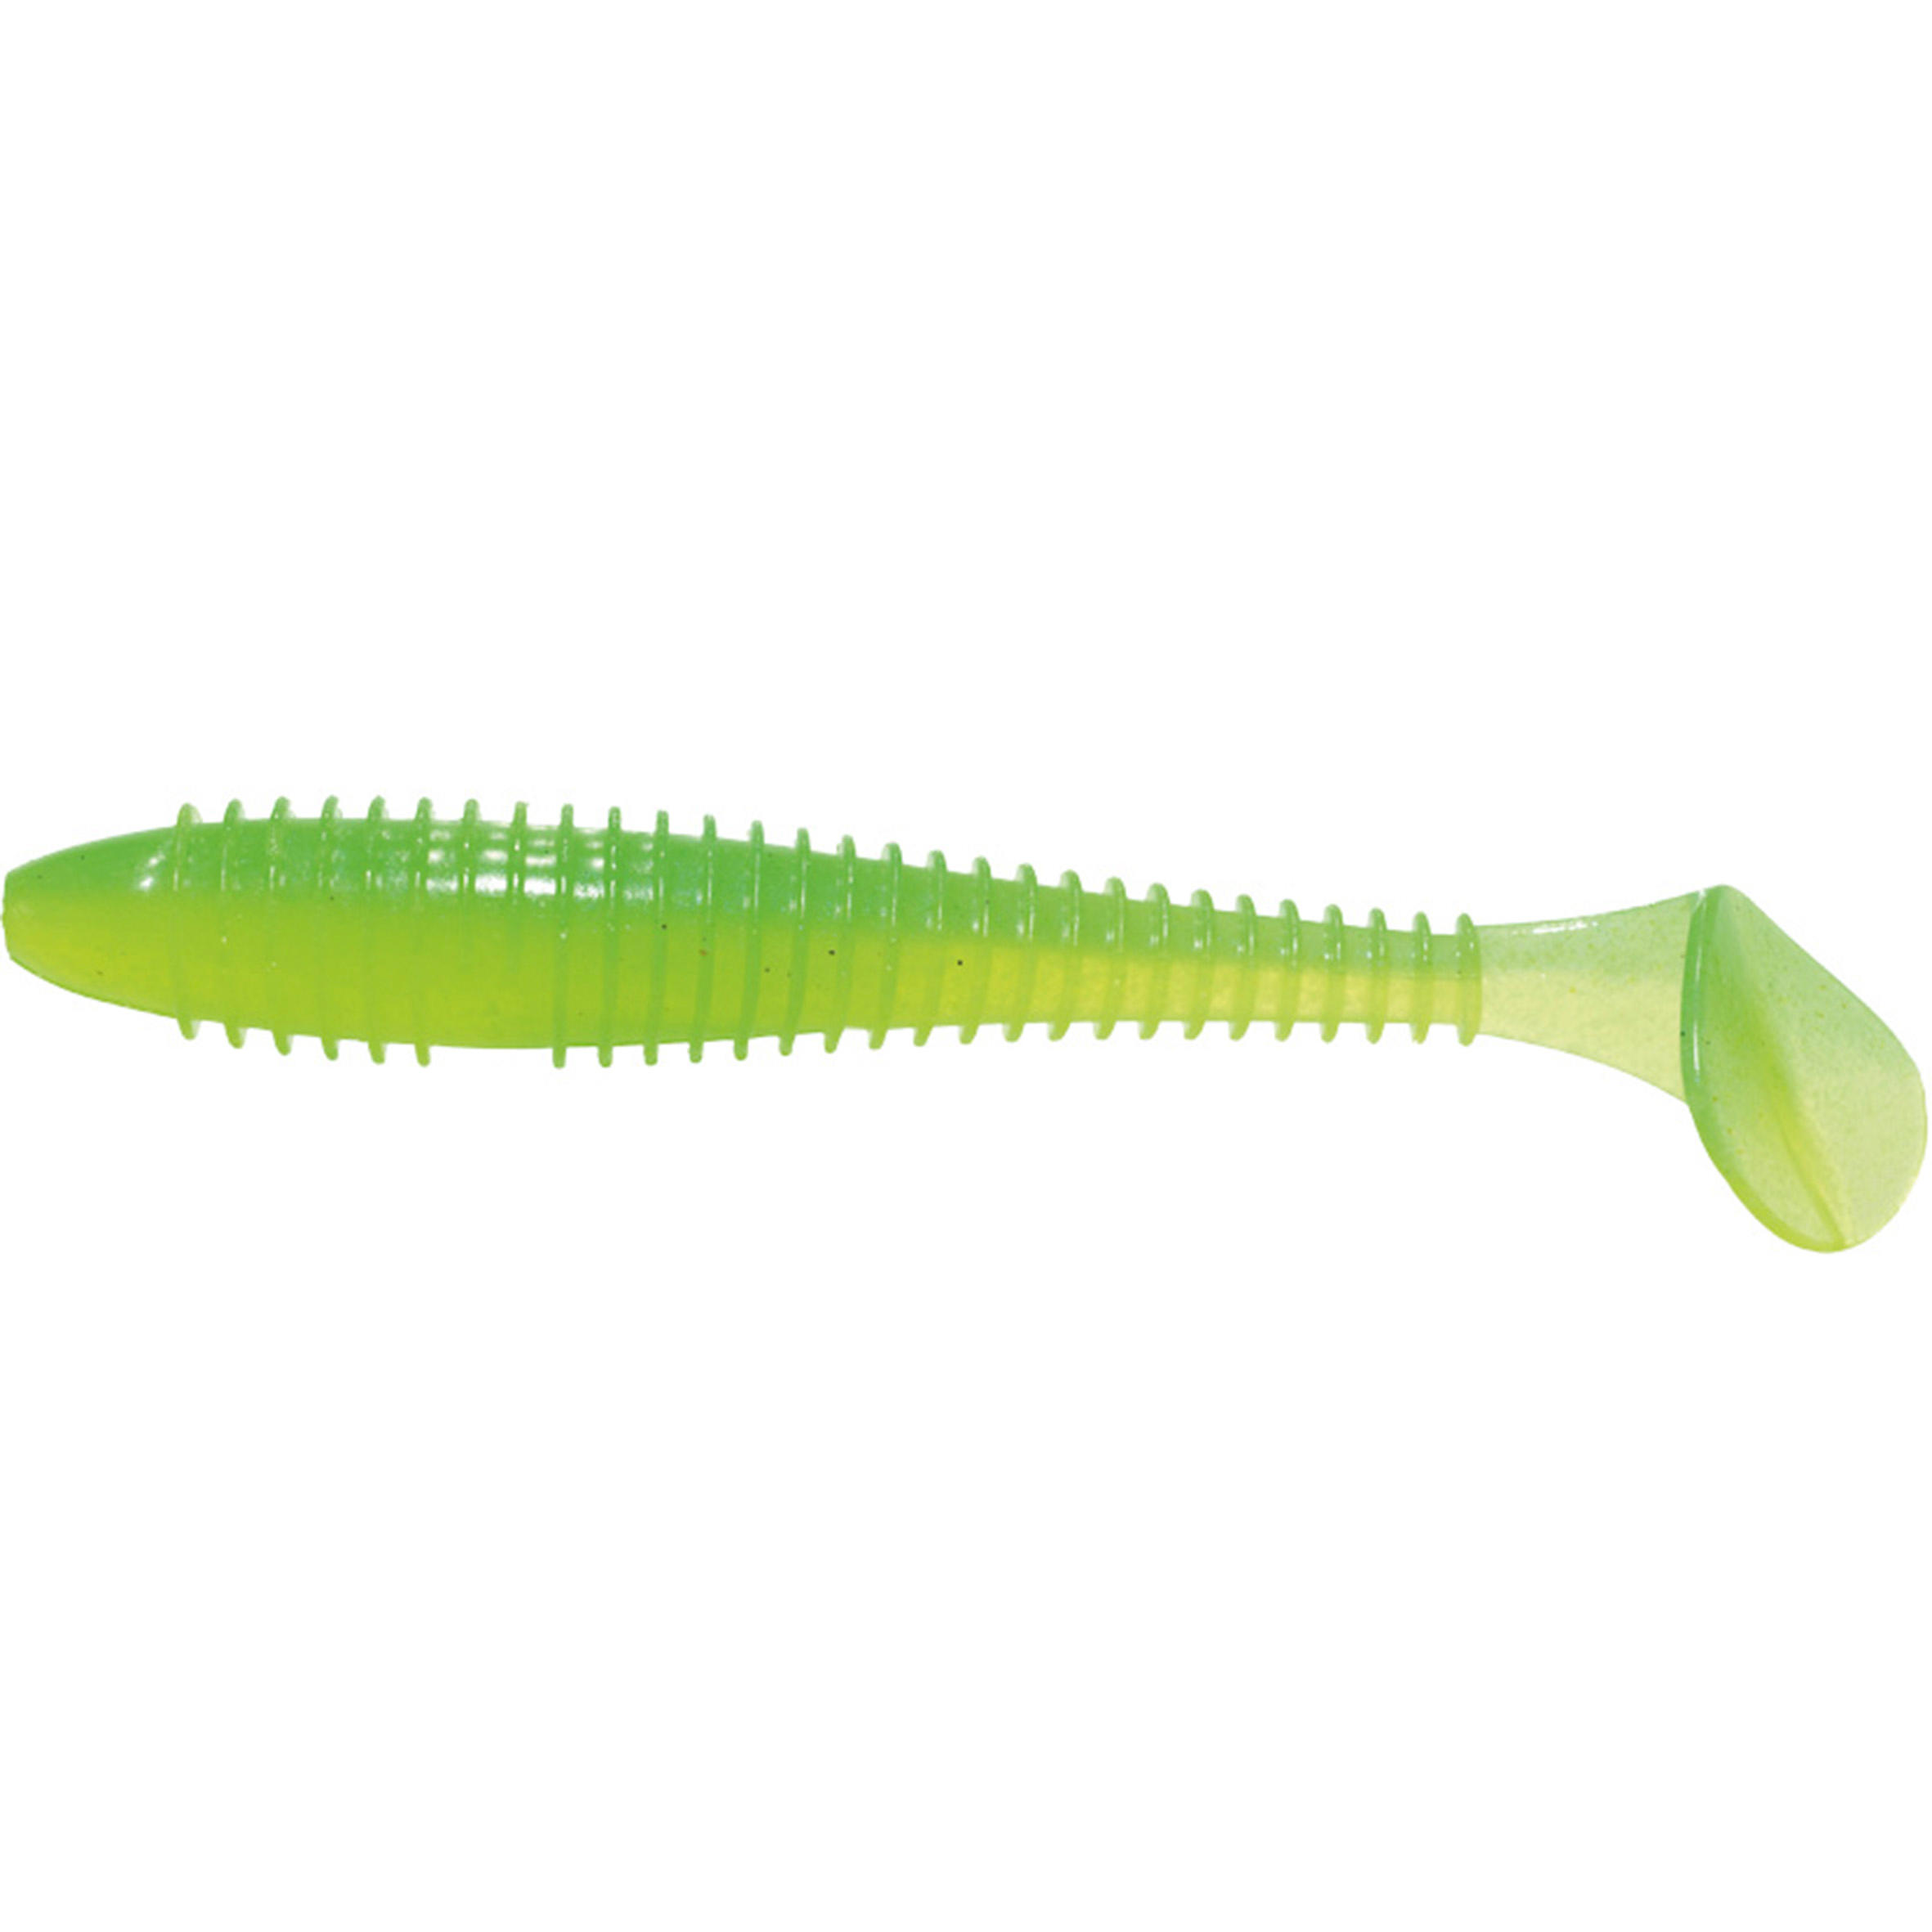 KEITECH LURE FISHING SUPPLE LURE FAT SWING IMP 2.8 - LIME/CHARTREUSE